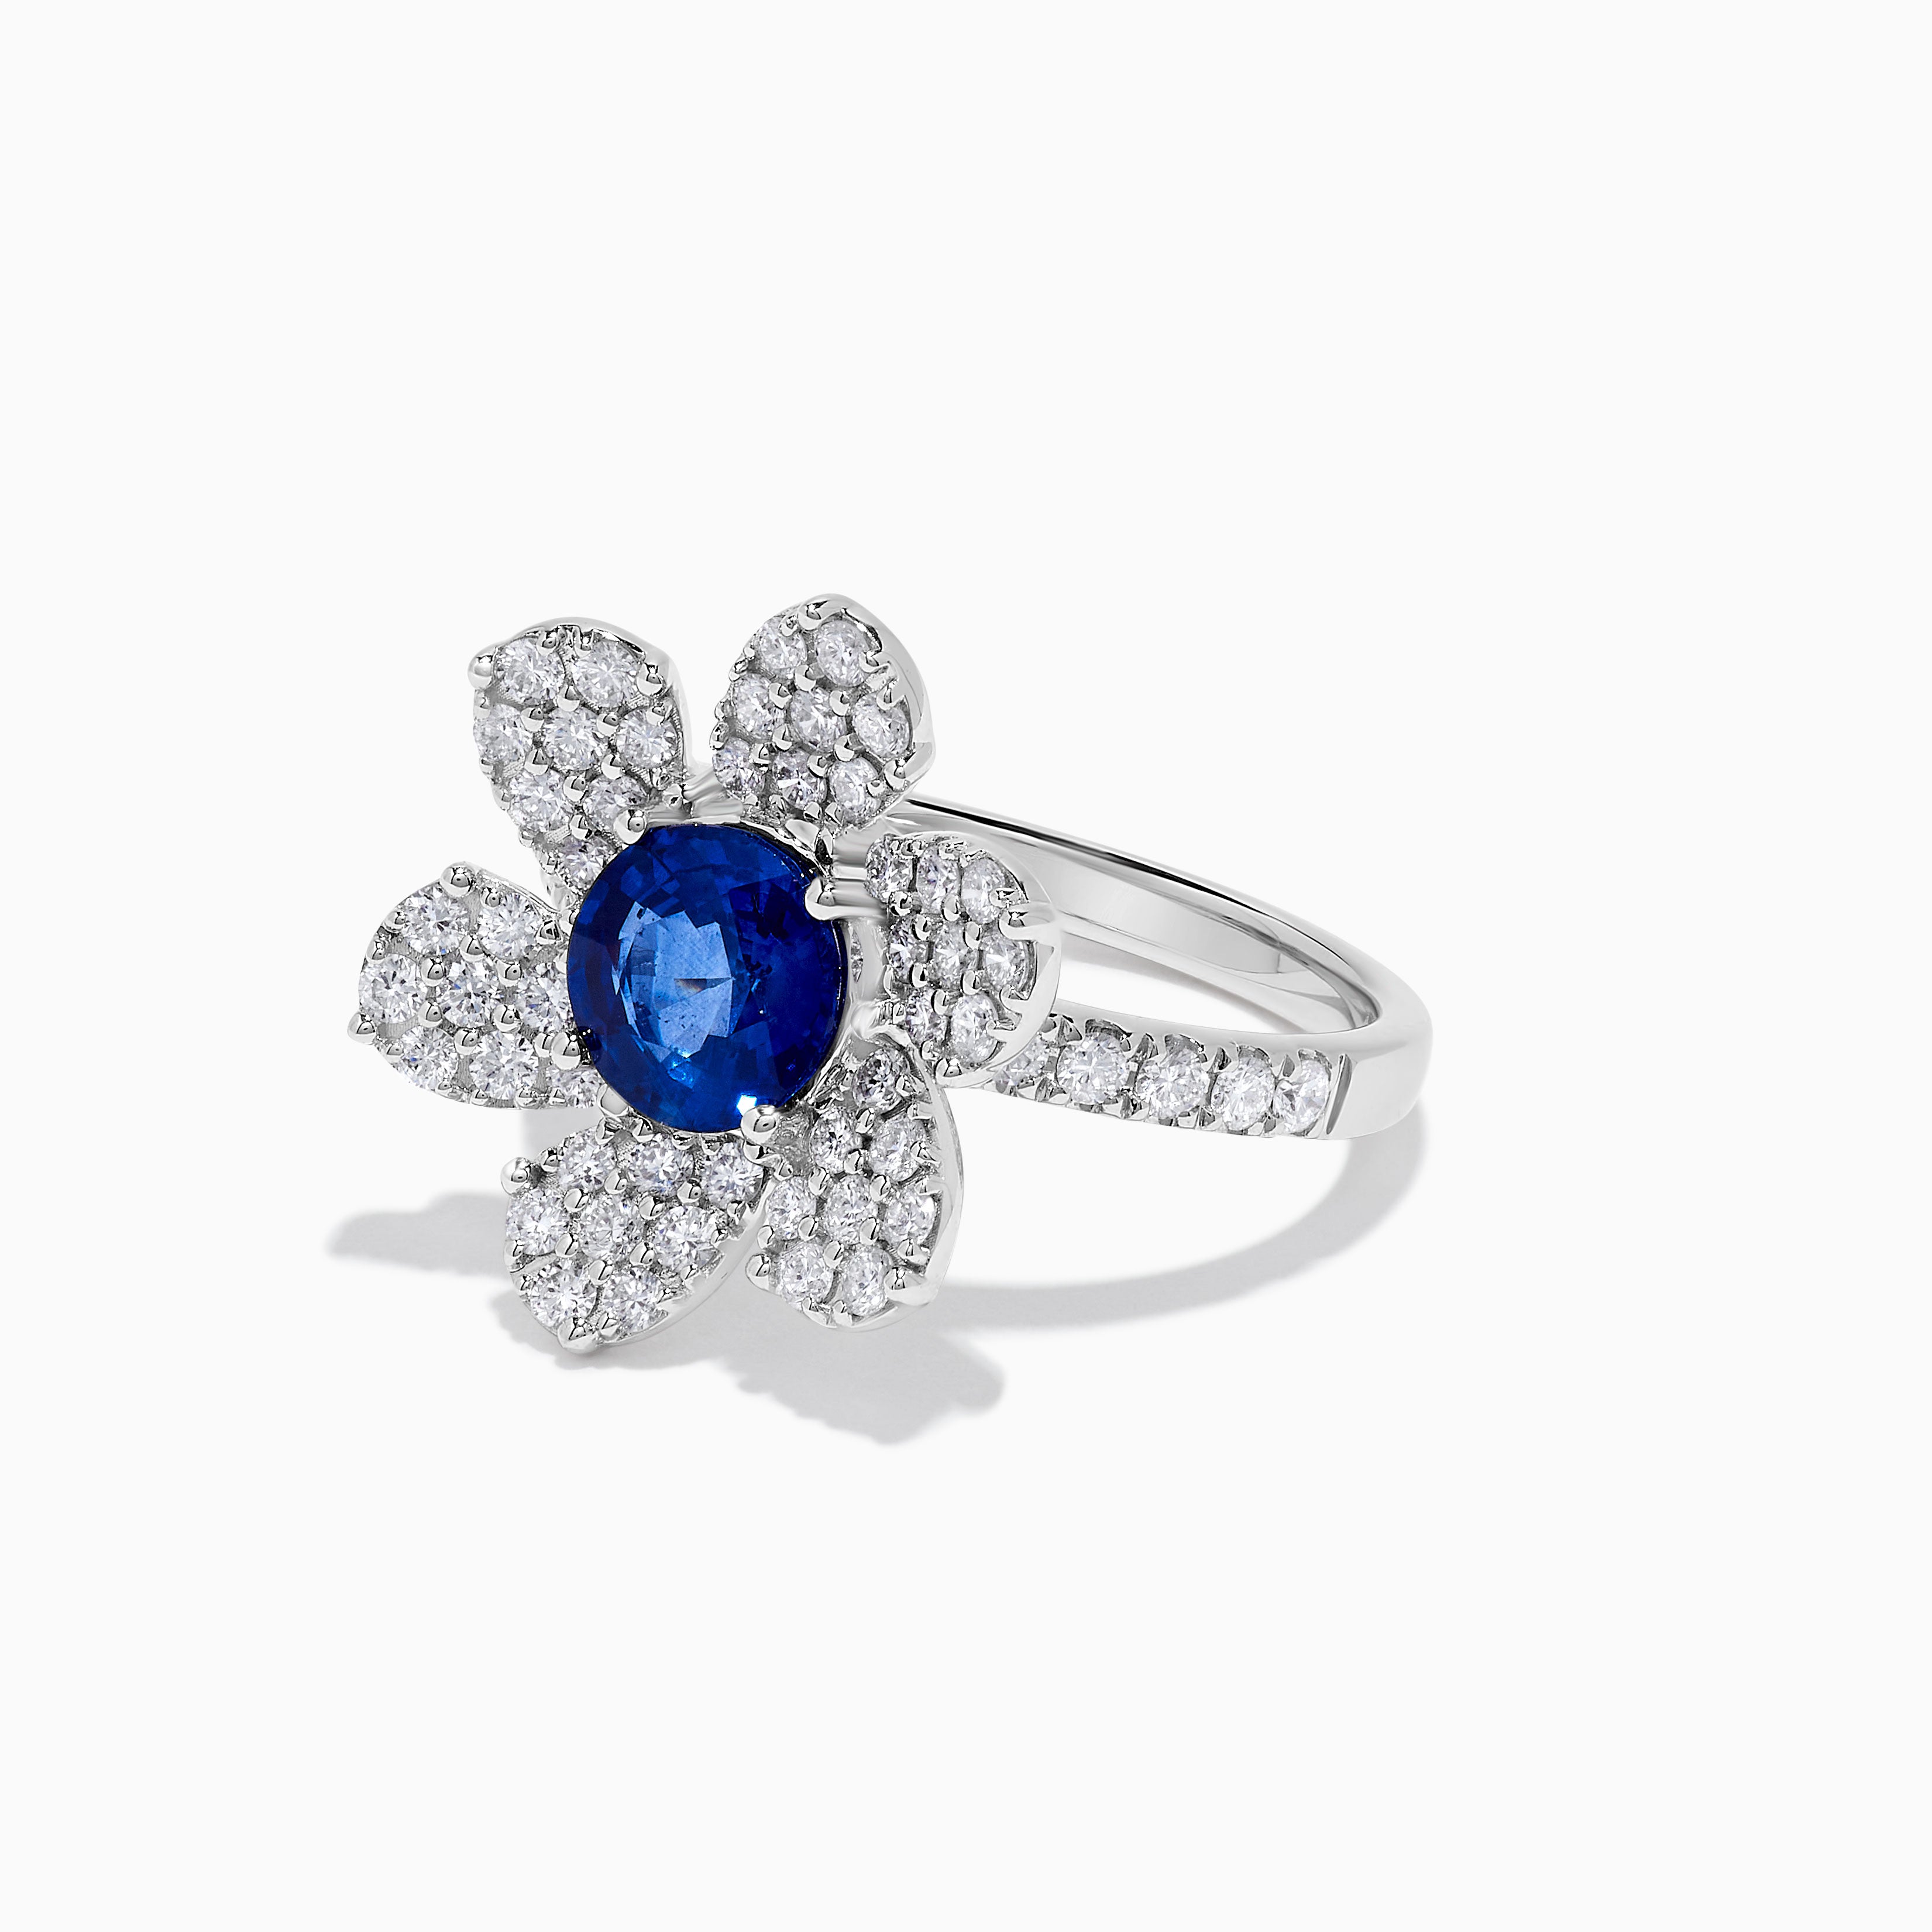 Natural Blue Round Sapphire and White Diamond 2.25 Carat TW Gold Cocktail Ring